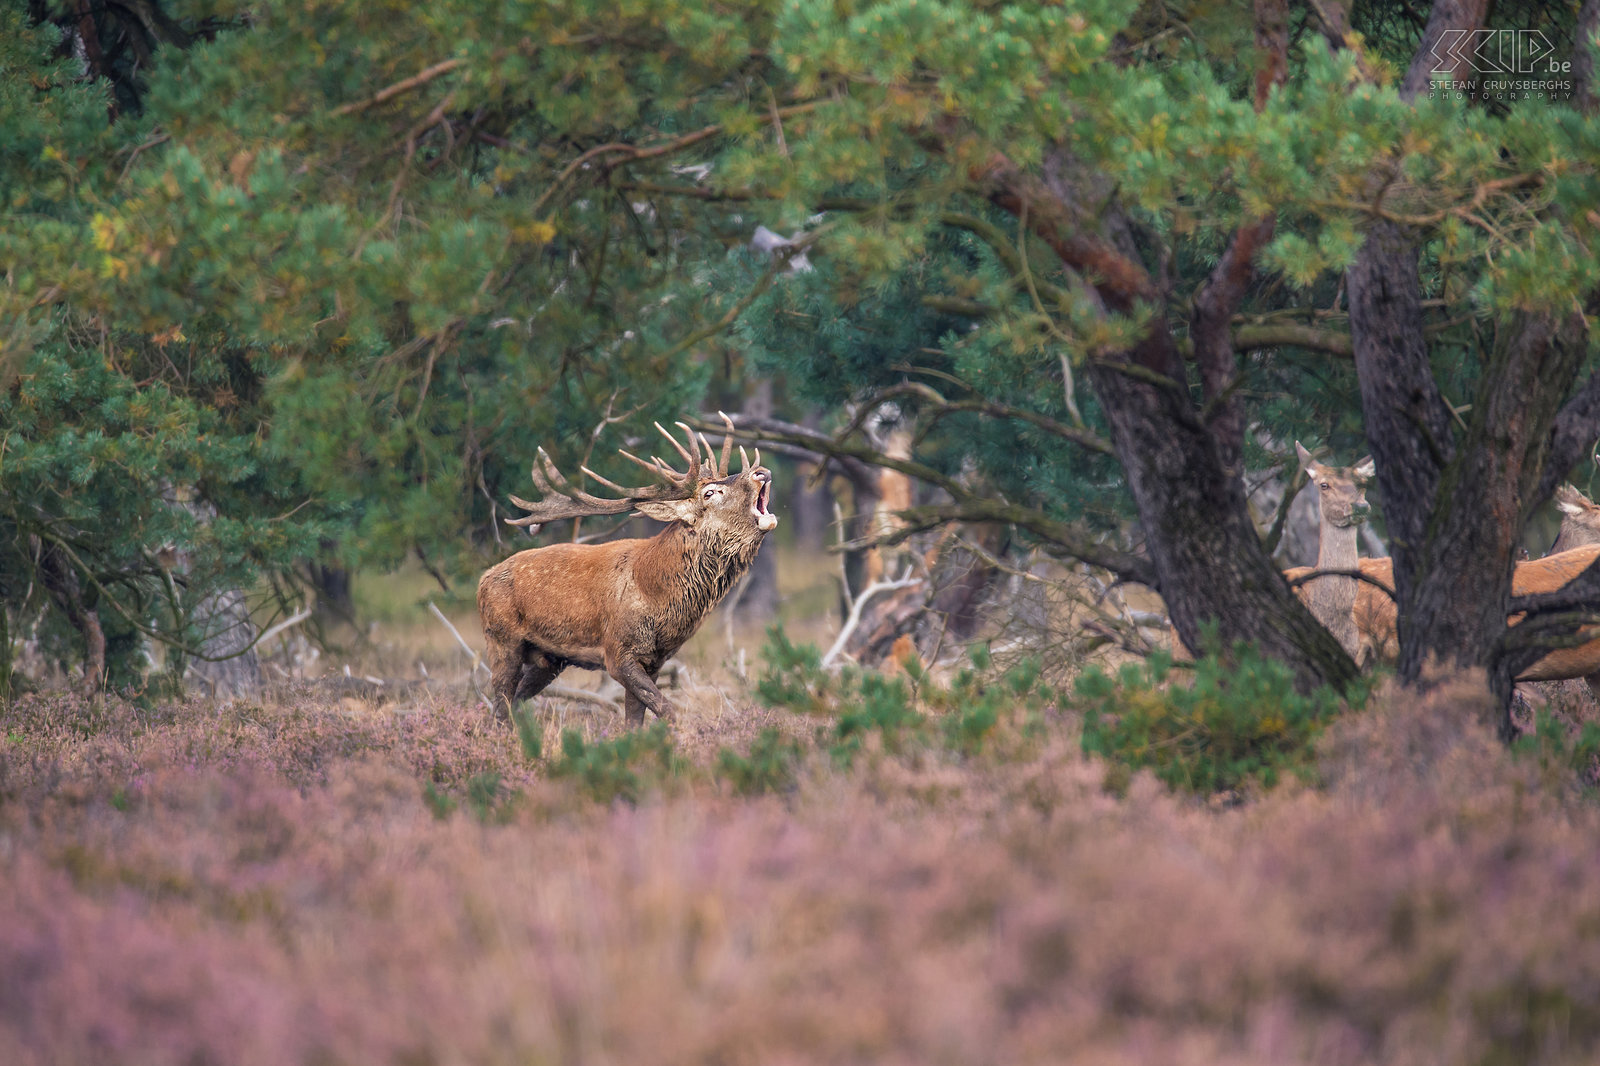 Rutting season in Hoge Veluwe - Roaring deer A male red deer with impressive antlers starts roaring to keep his harem or females together and attract other hinds. Stefan Cruysberghs